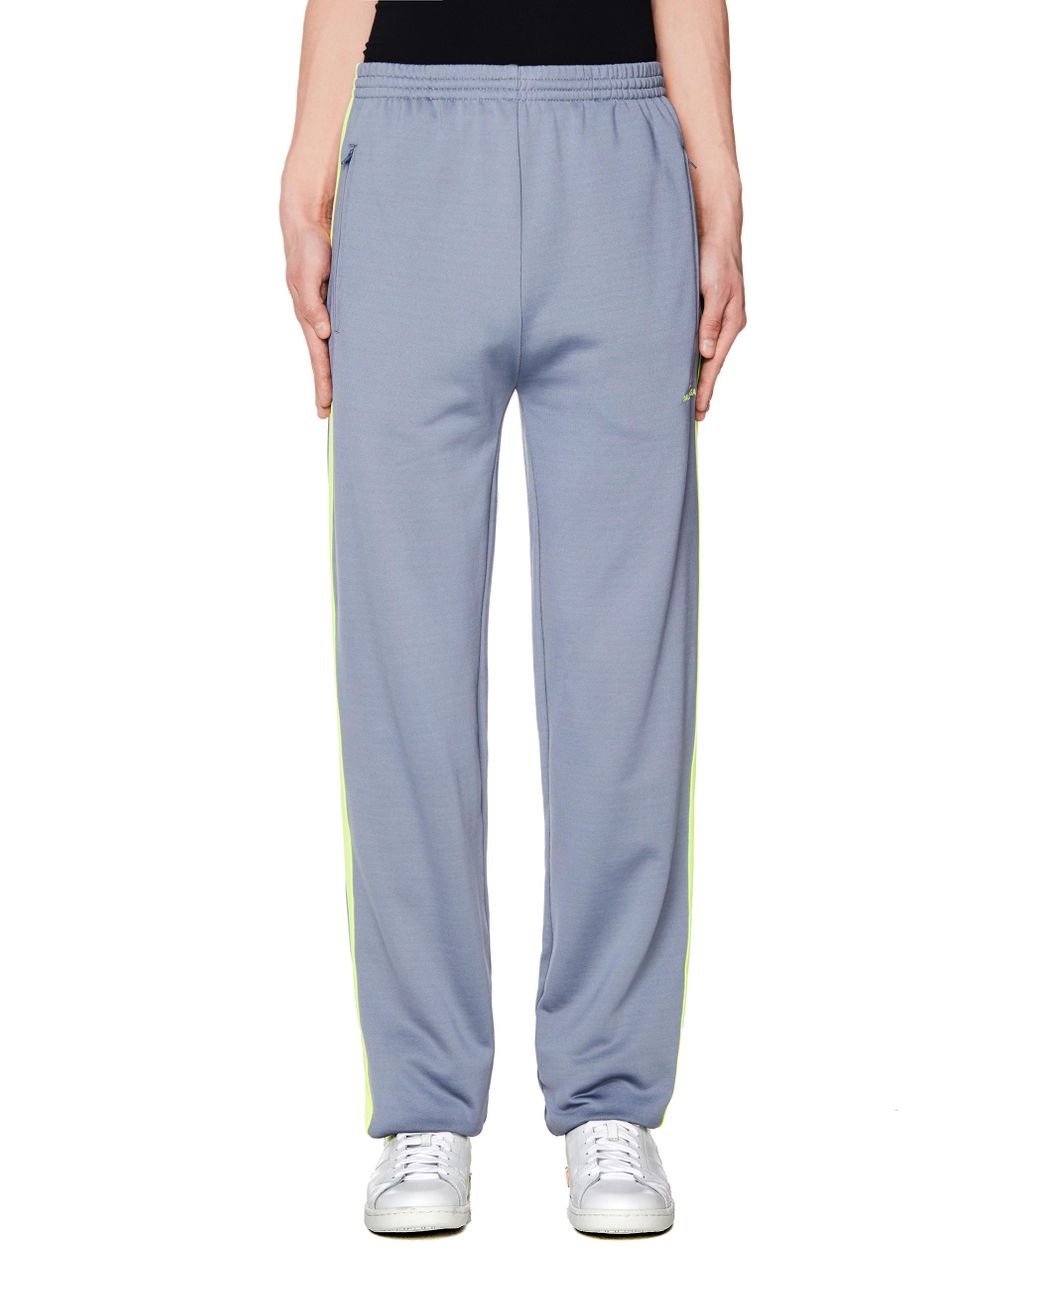 Balenciaga Cotton Grey Trackpants With Neon Stripes in Gray for Men - Lyst